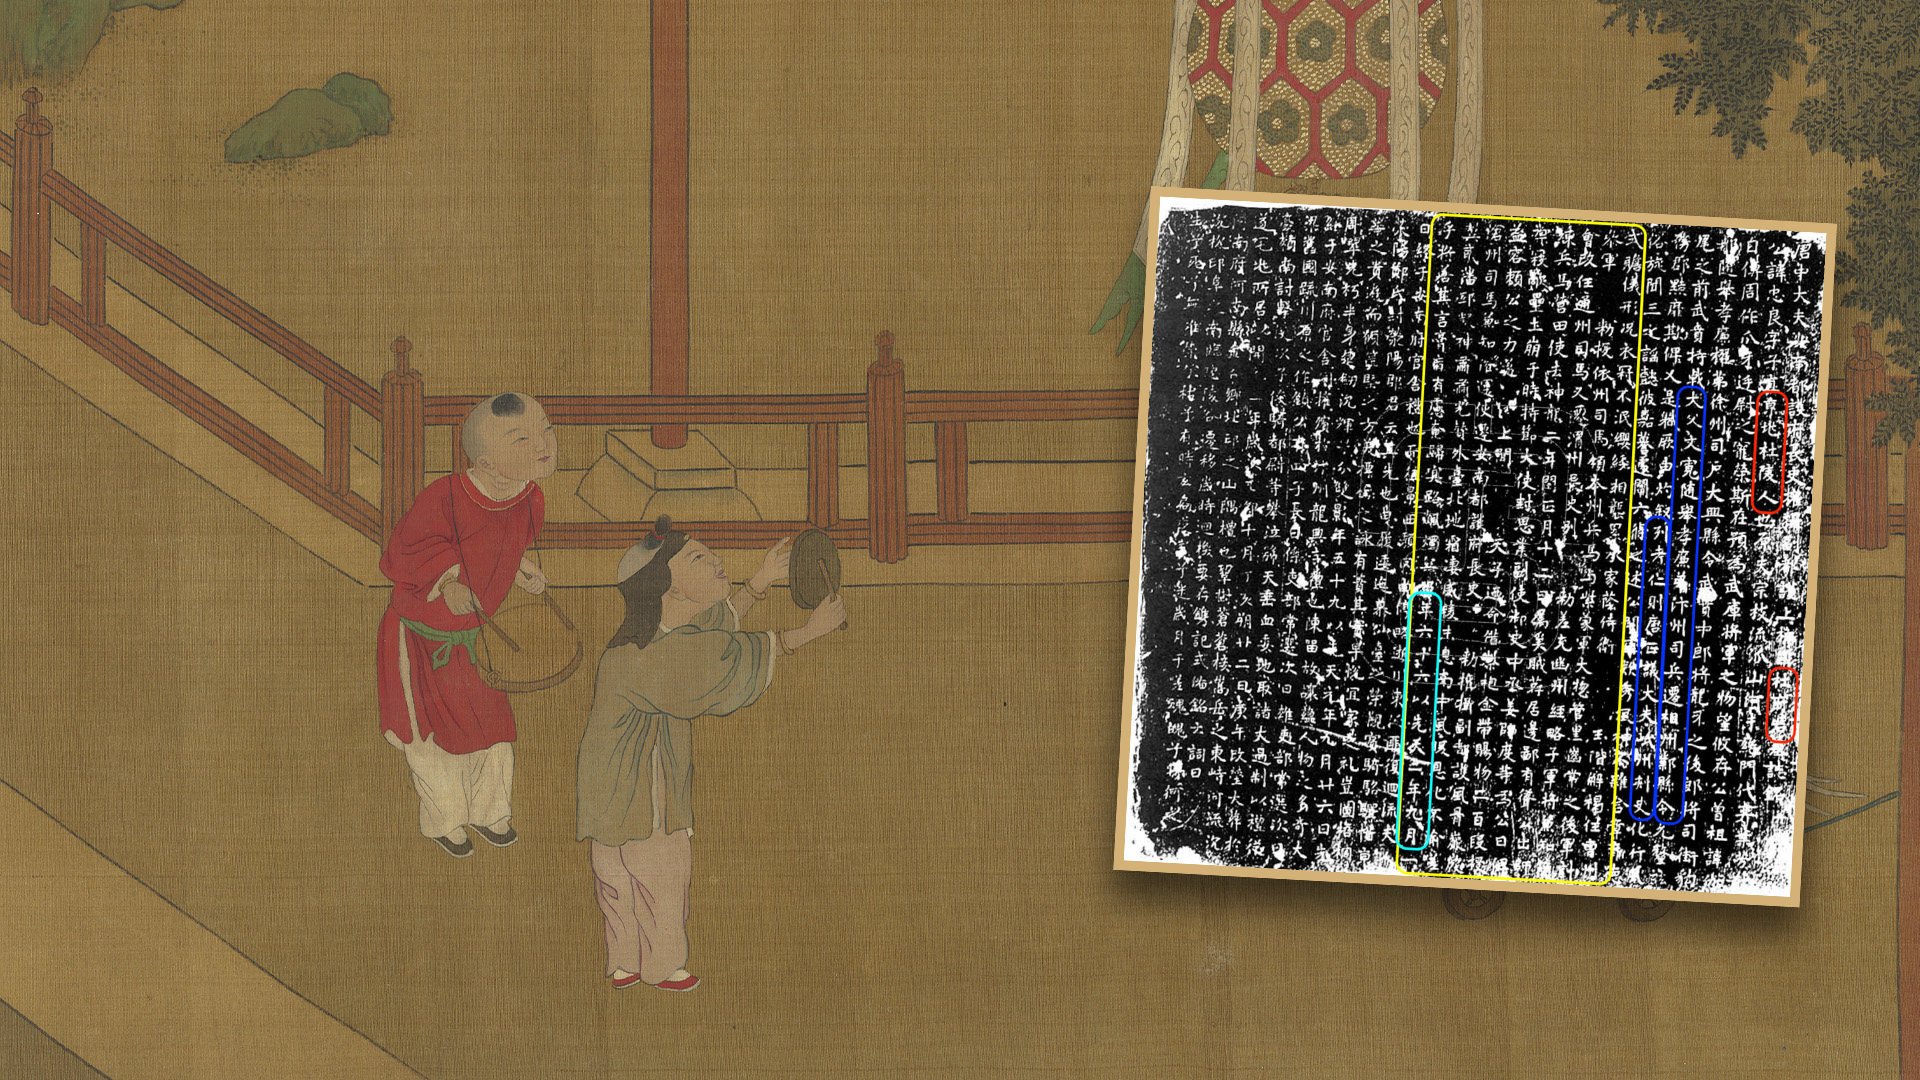 New research has revealed that a medieval  examination taken in 
Tang-era China helped encourage social mobility. Photo: SCMP composite/pnas.org/npm.edu.tw
